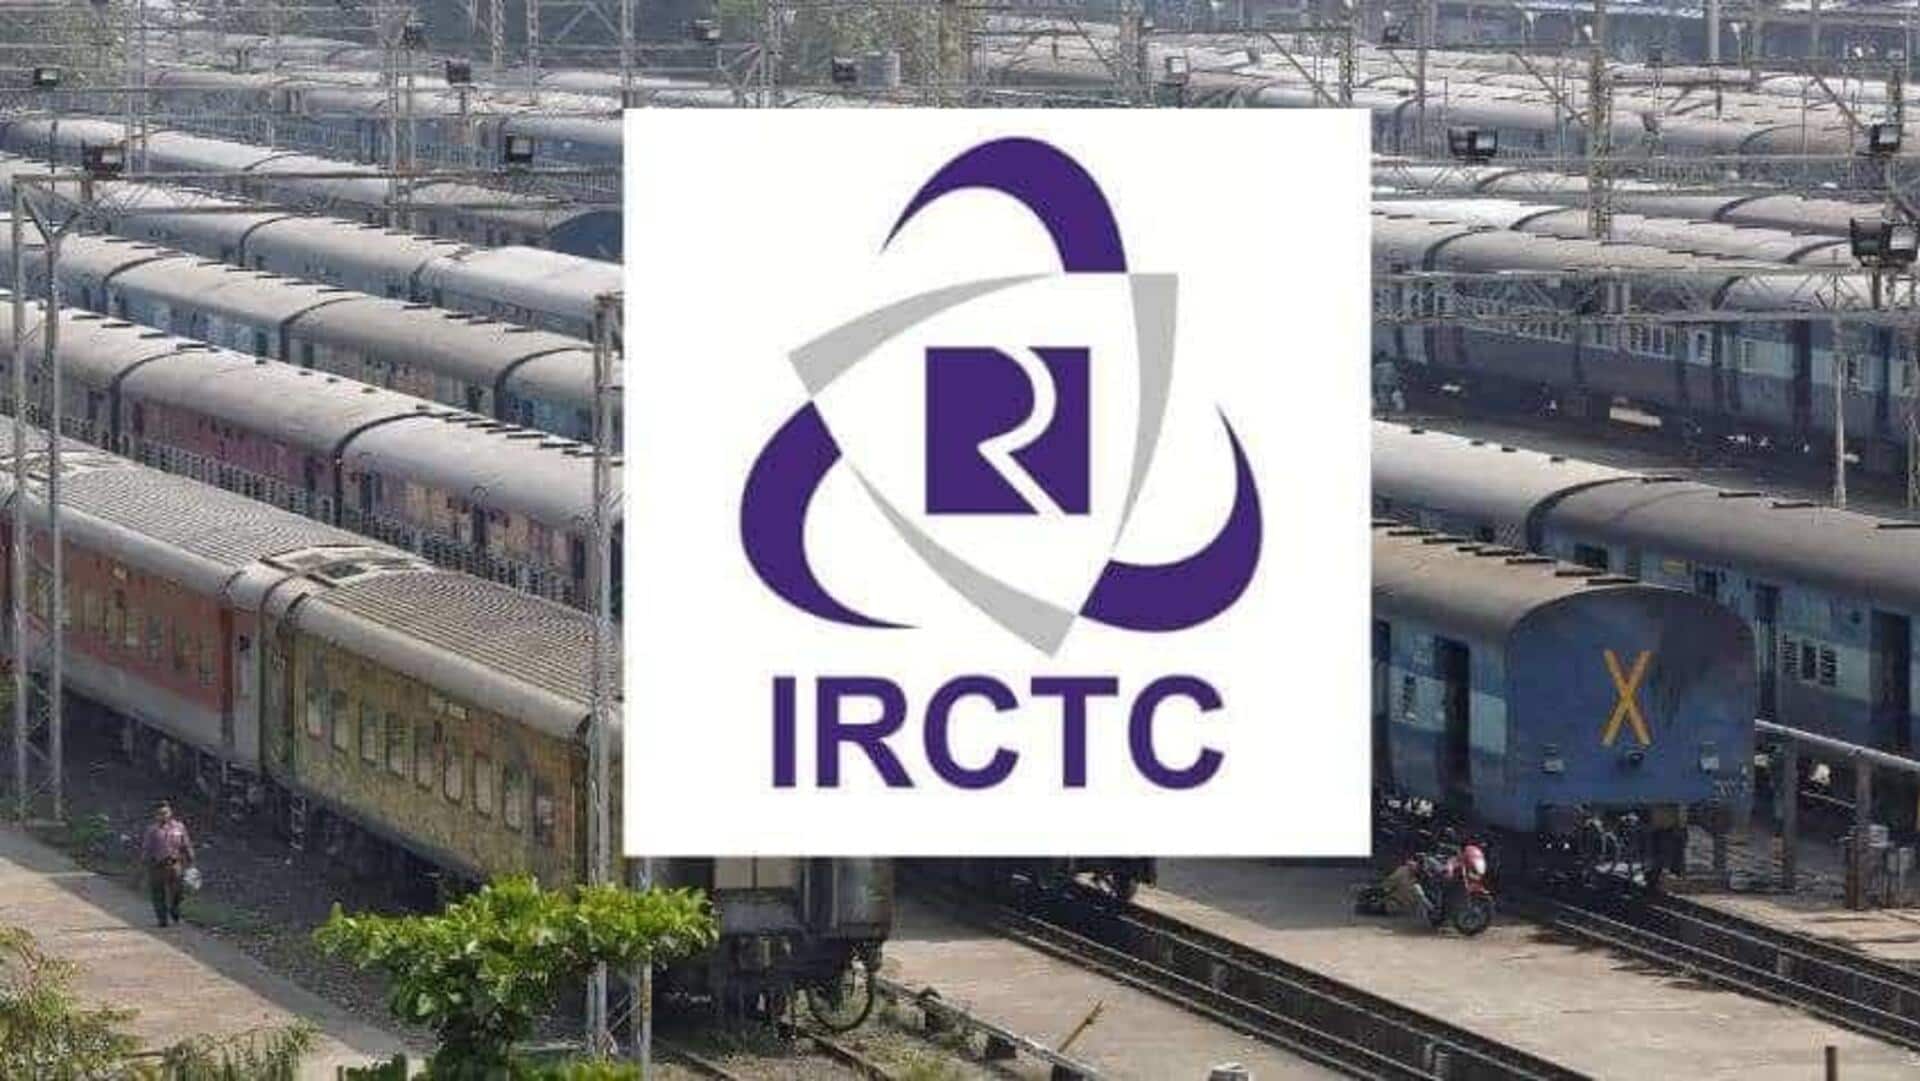 IRCTC shares jump 3% to hit 52-week high: Here's why